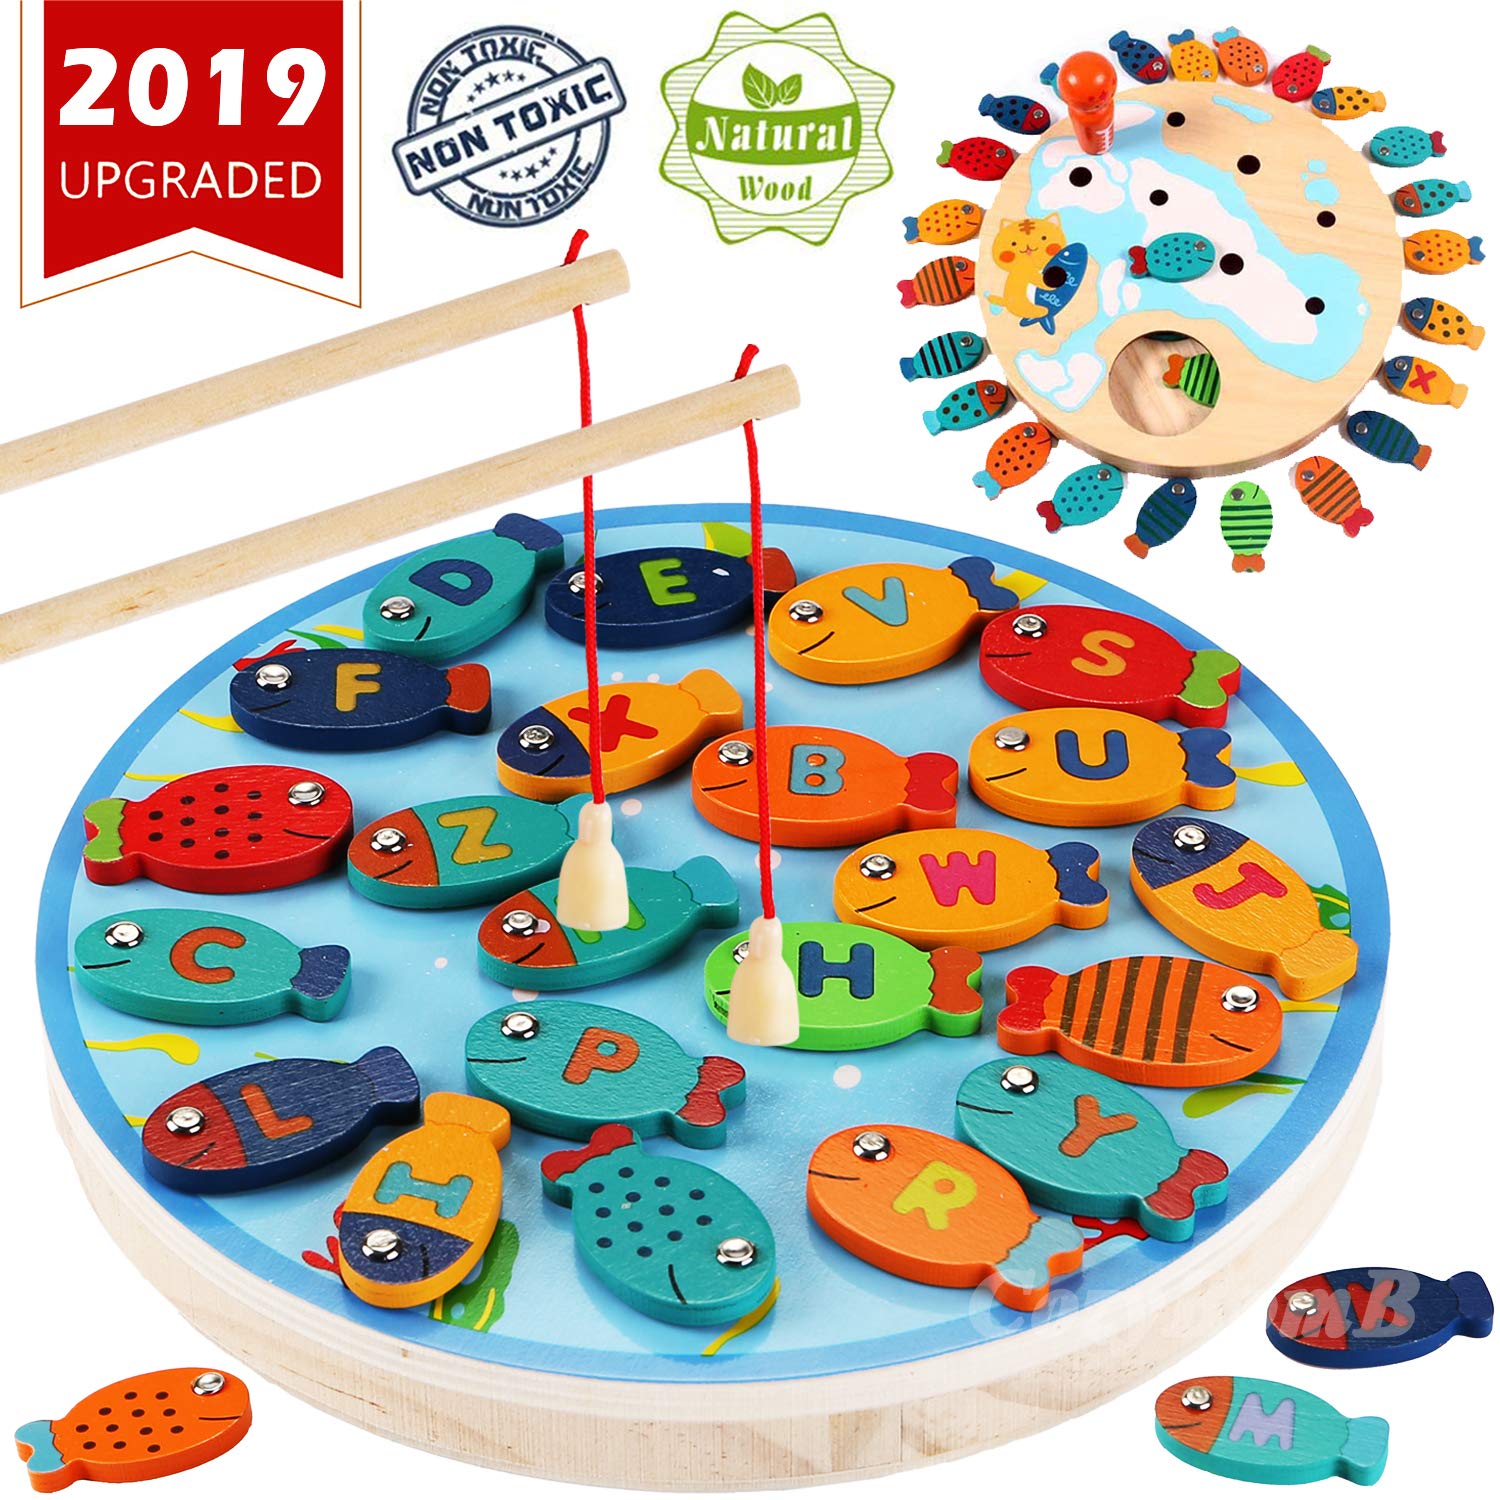 CozyBomB Magnetic Wooden Fishing Game Toy for Toddlers - Alphabet Fish Catching Counting Preschool Board Games Toys for 2 3 4 Year Old Girl Boy Kids Birthday Learning Education Math with Magnet Poles